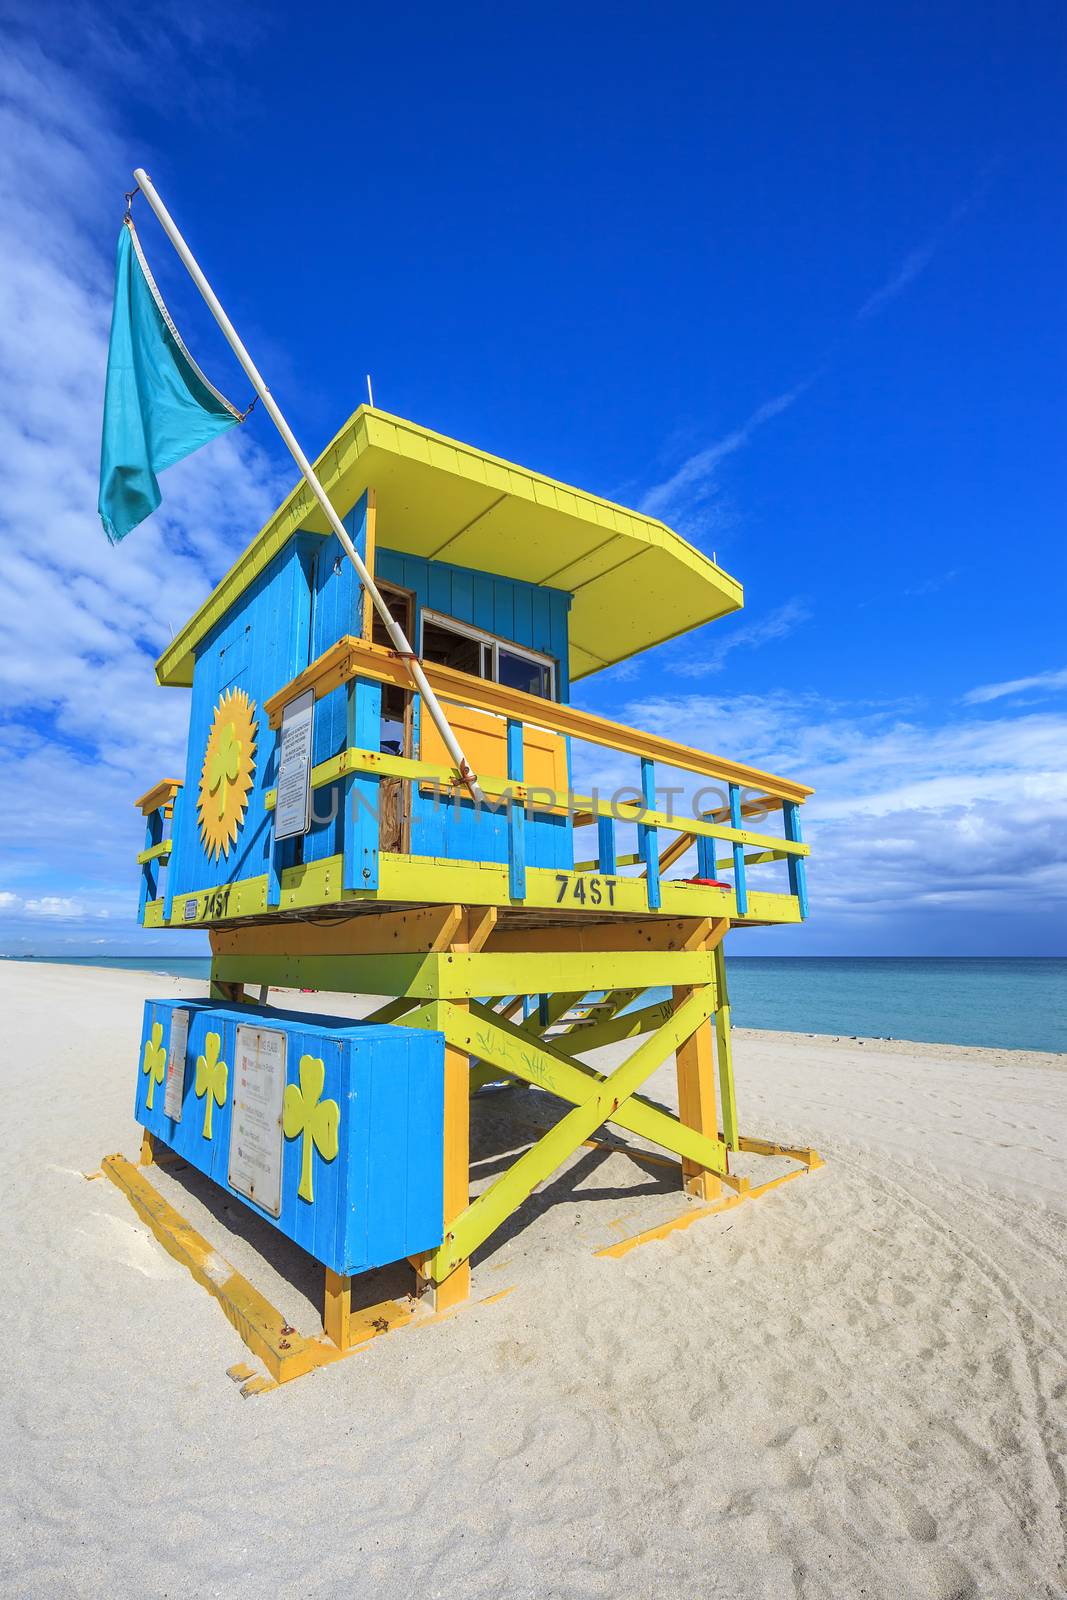 Famous lifeguard house in a typical colorful Art Deco style, Miami Beach